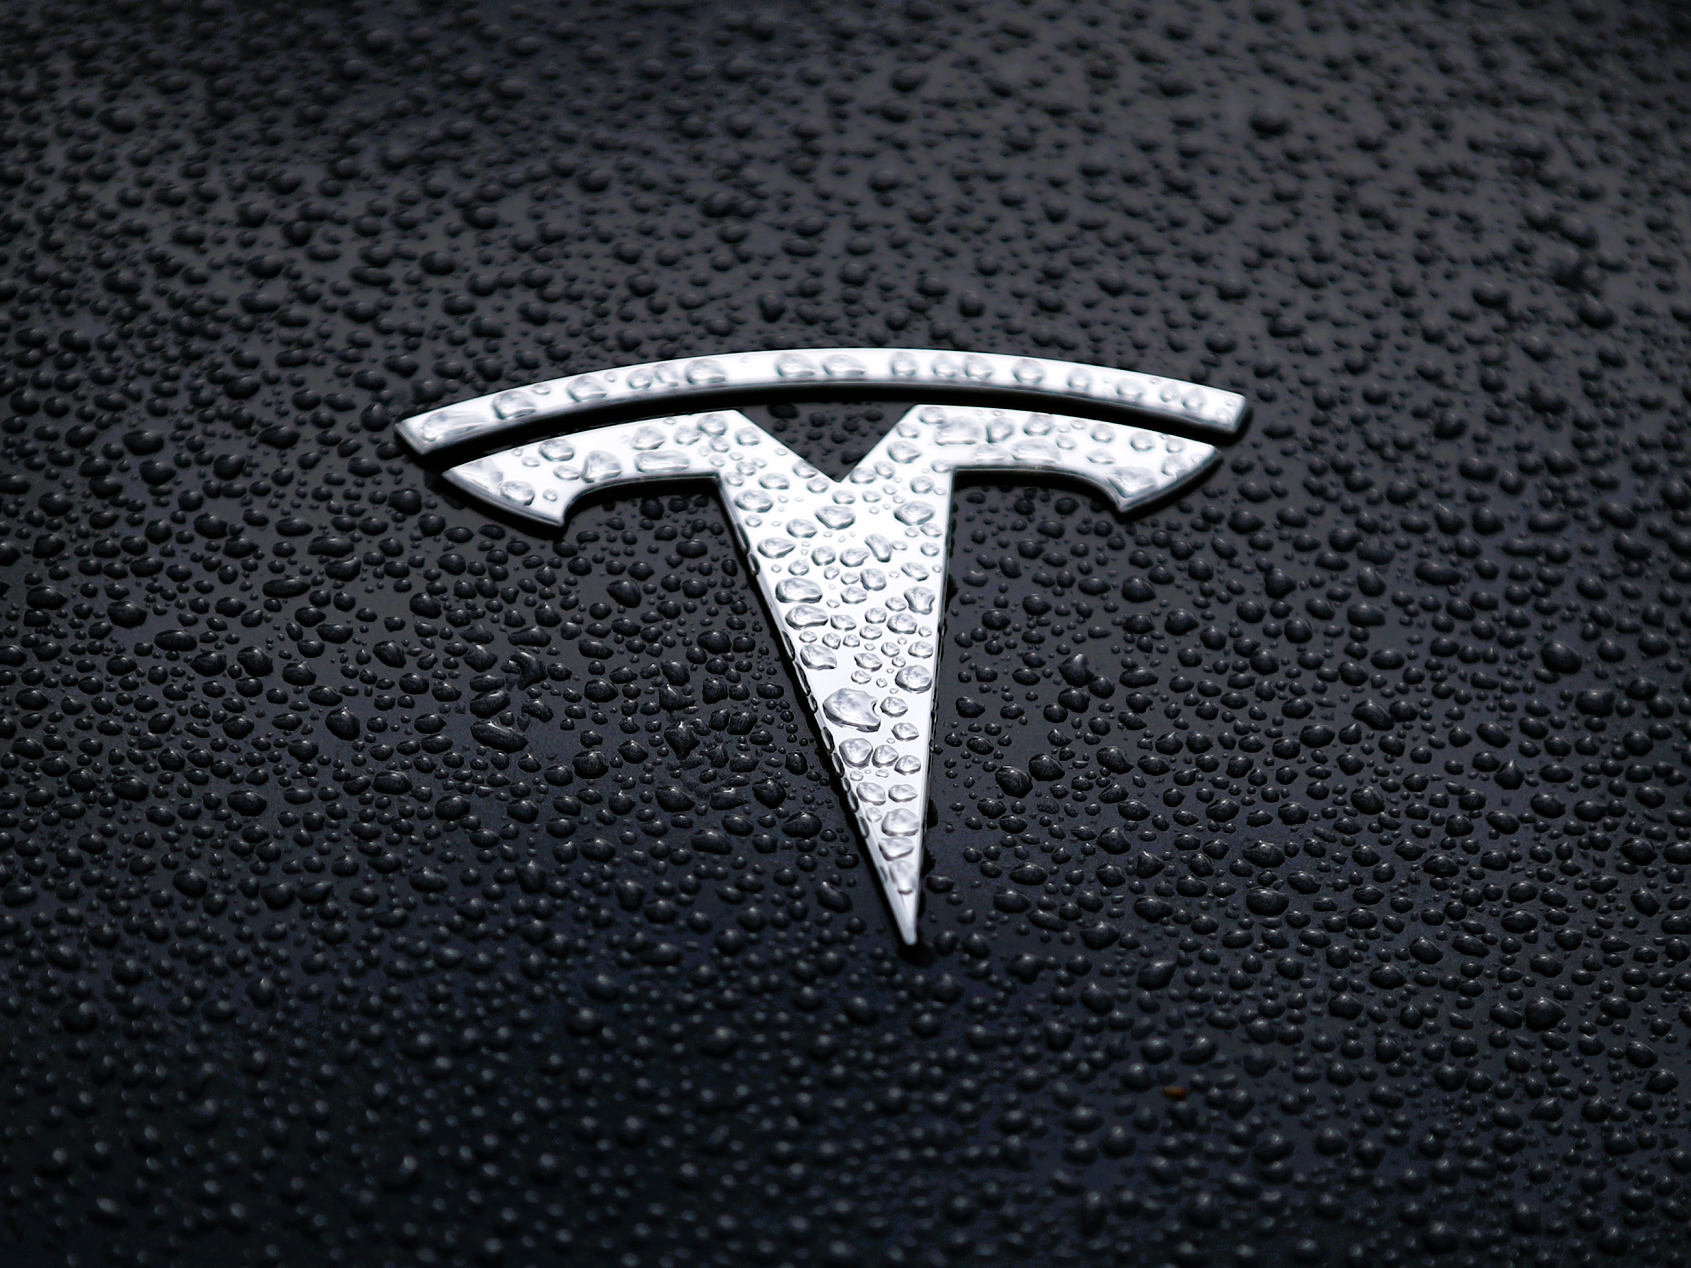 Tesla stock dropped by around 65 per cent between January-December 2022